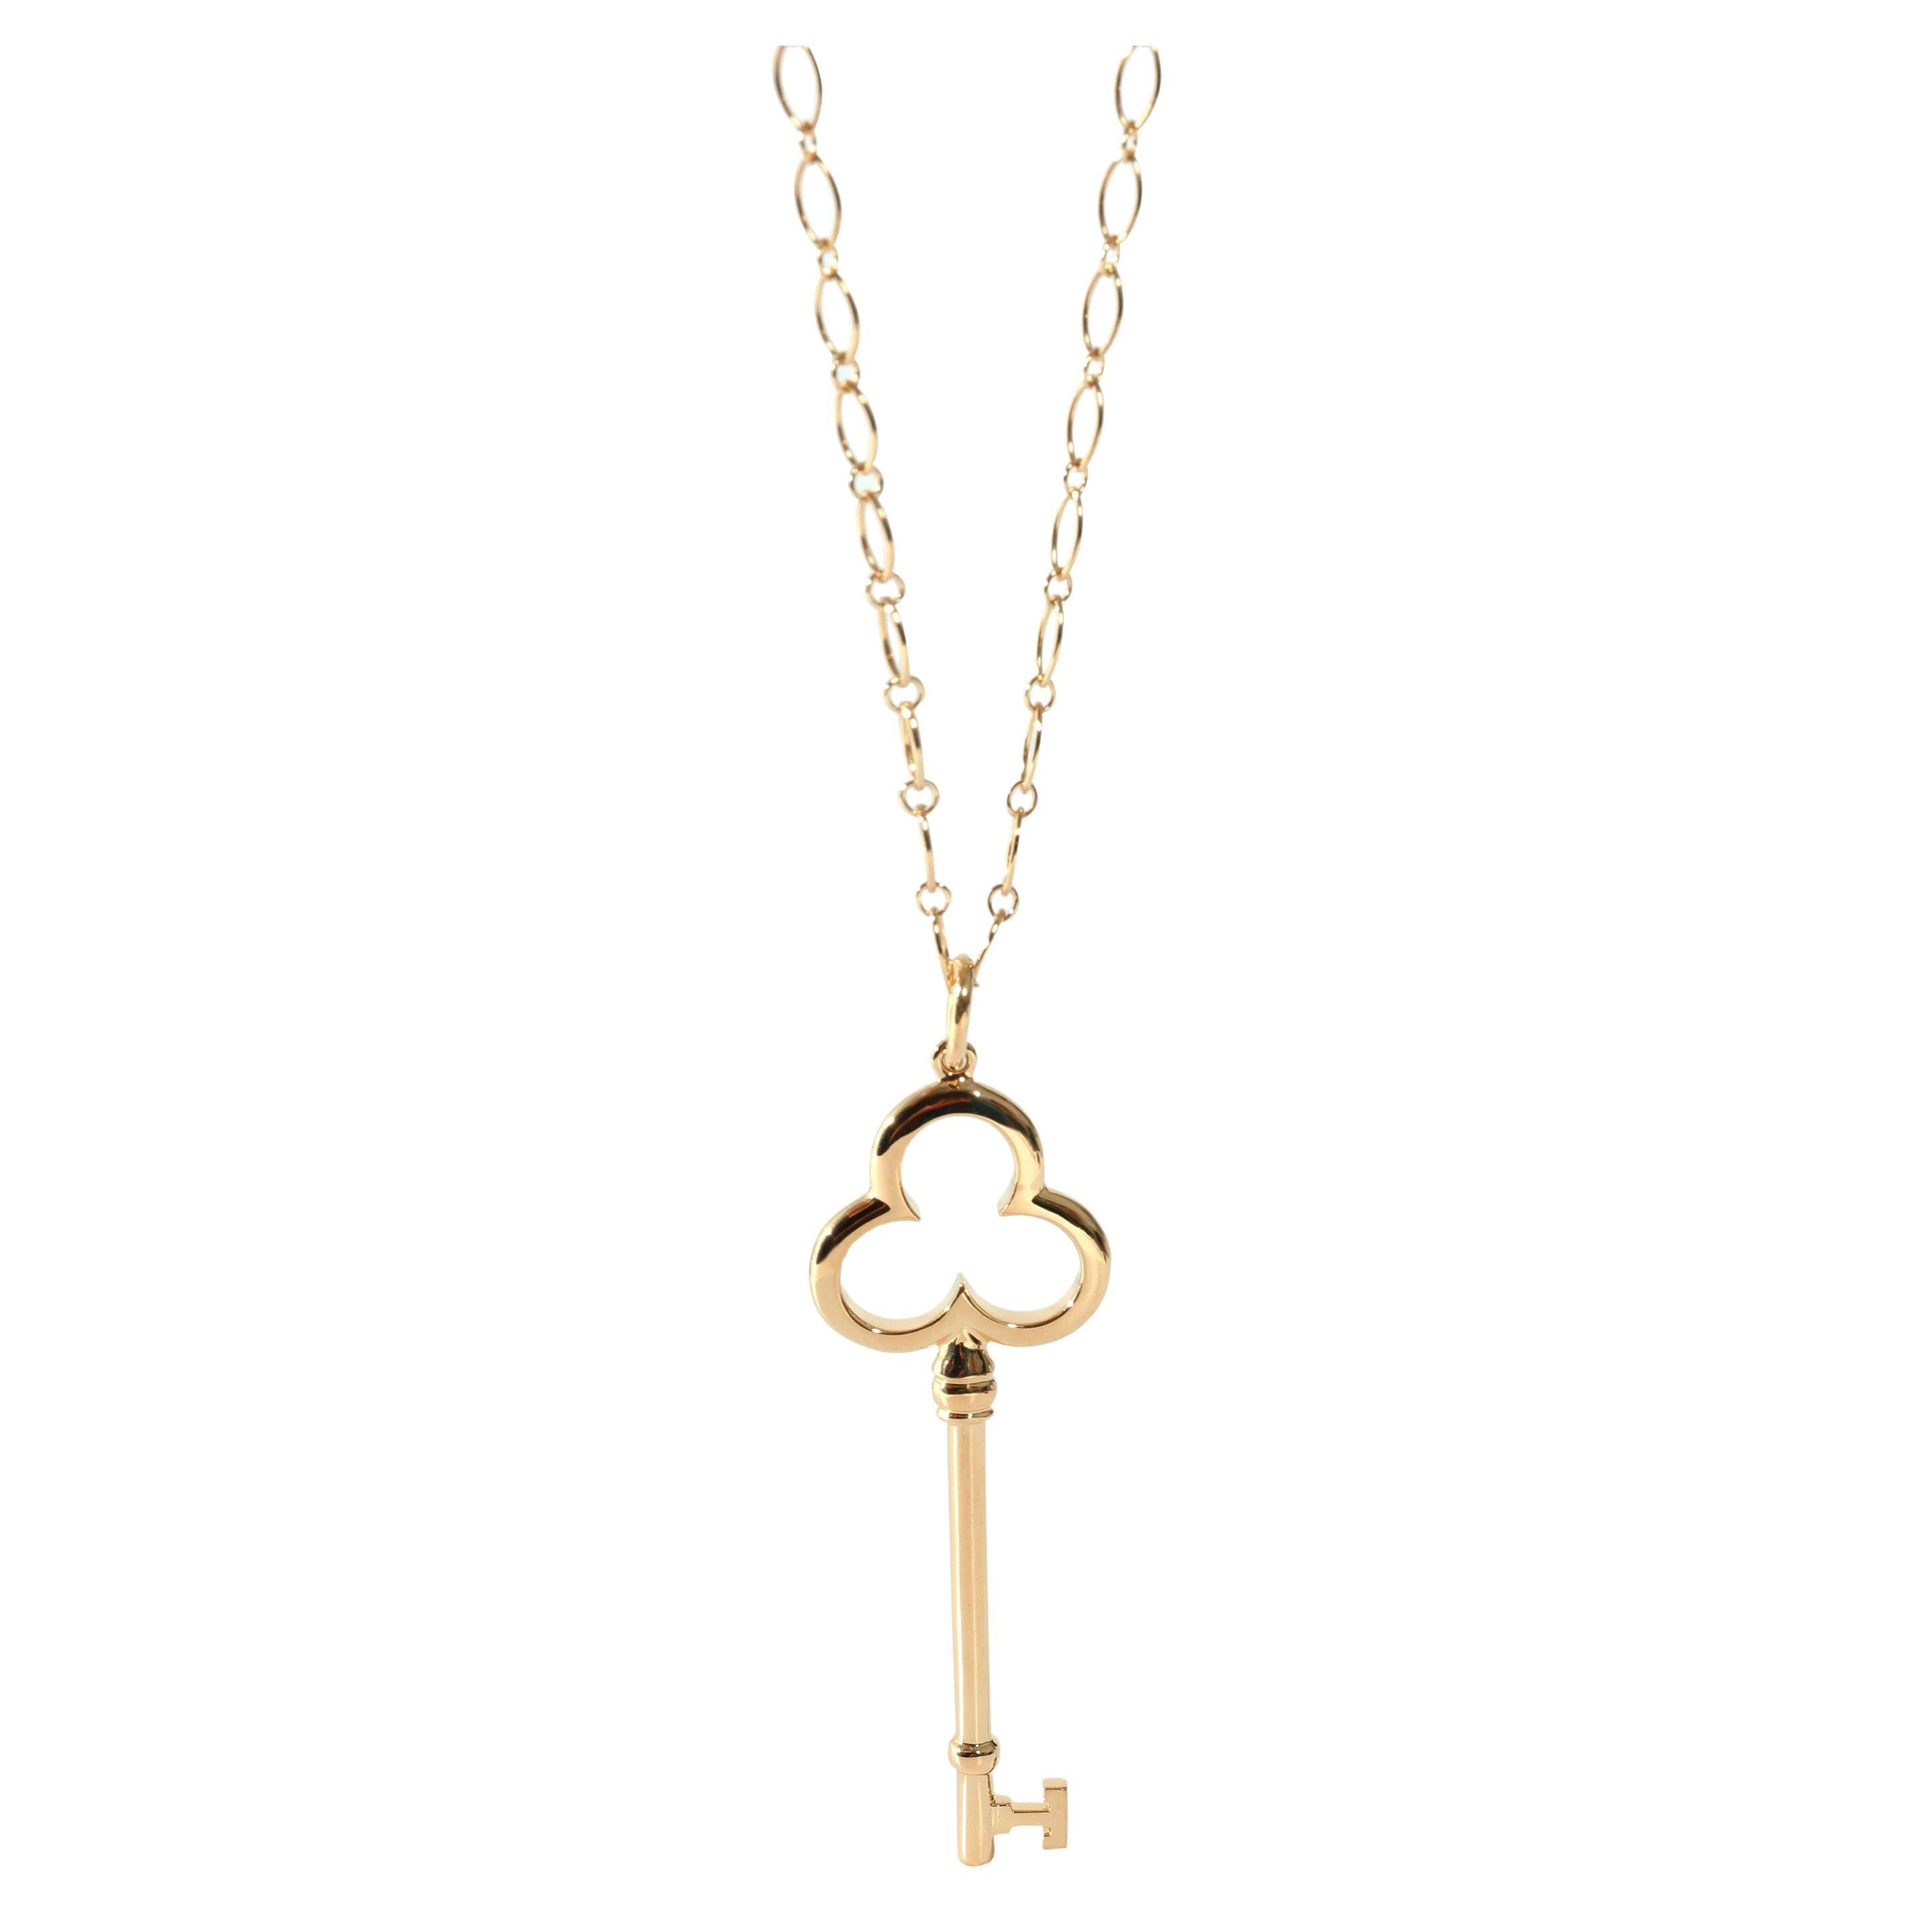 Tiffany & Co. Trefoil Key Pendant Necklace in 18KT Yellow Gold